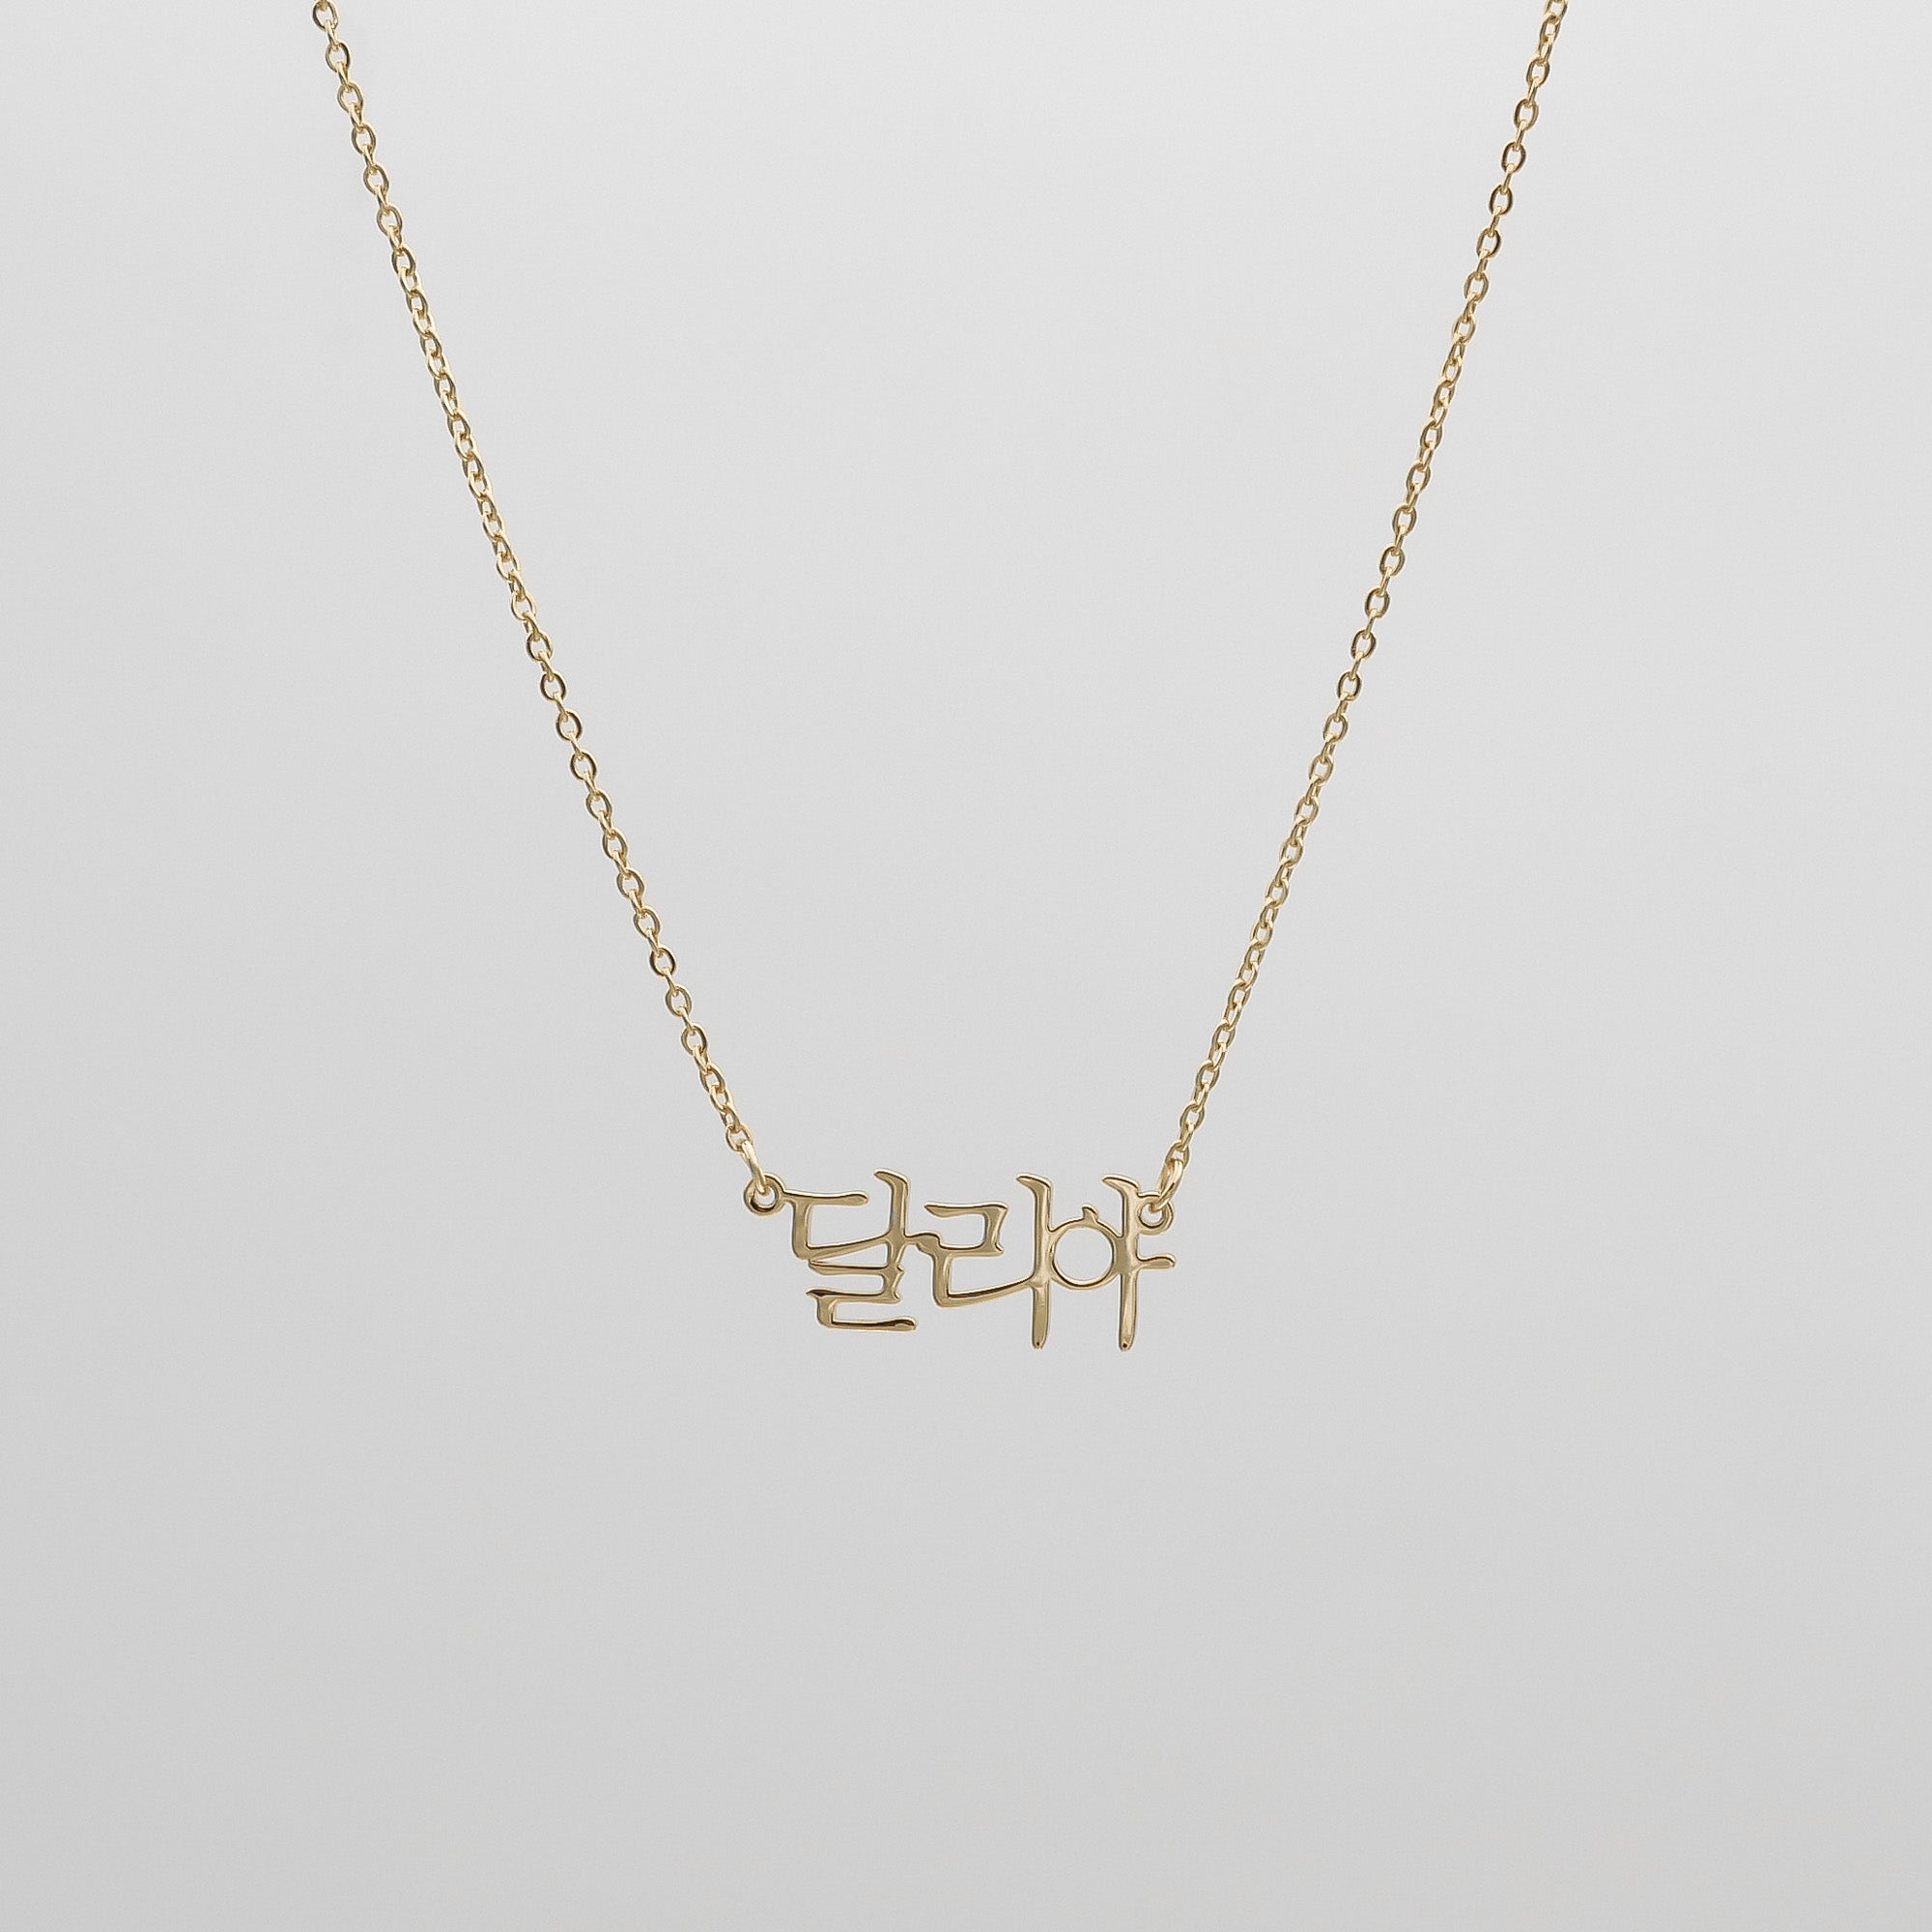 Example of a personalised Korean Name necklace in gold on a classic link chain. 